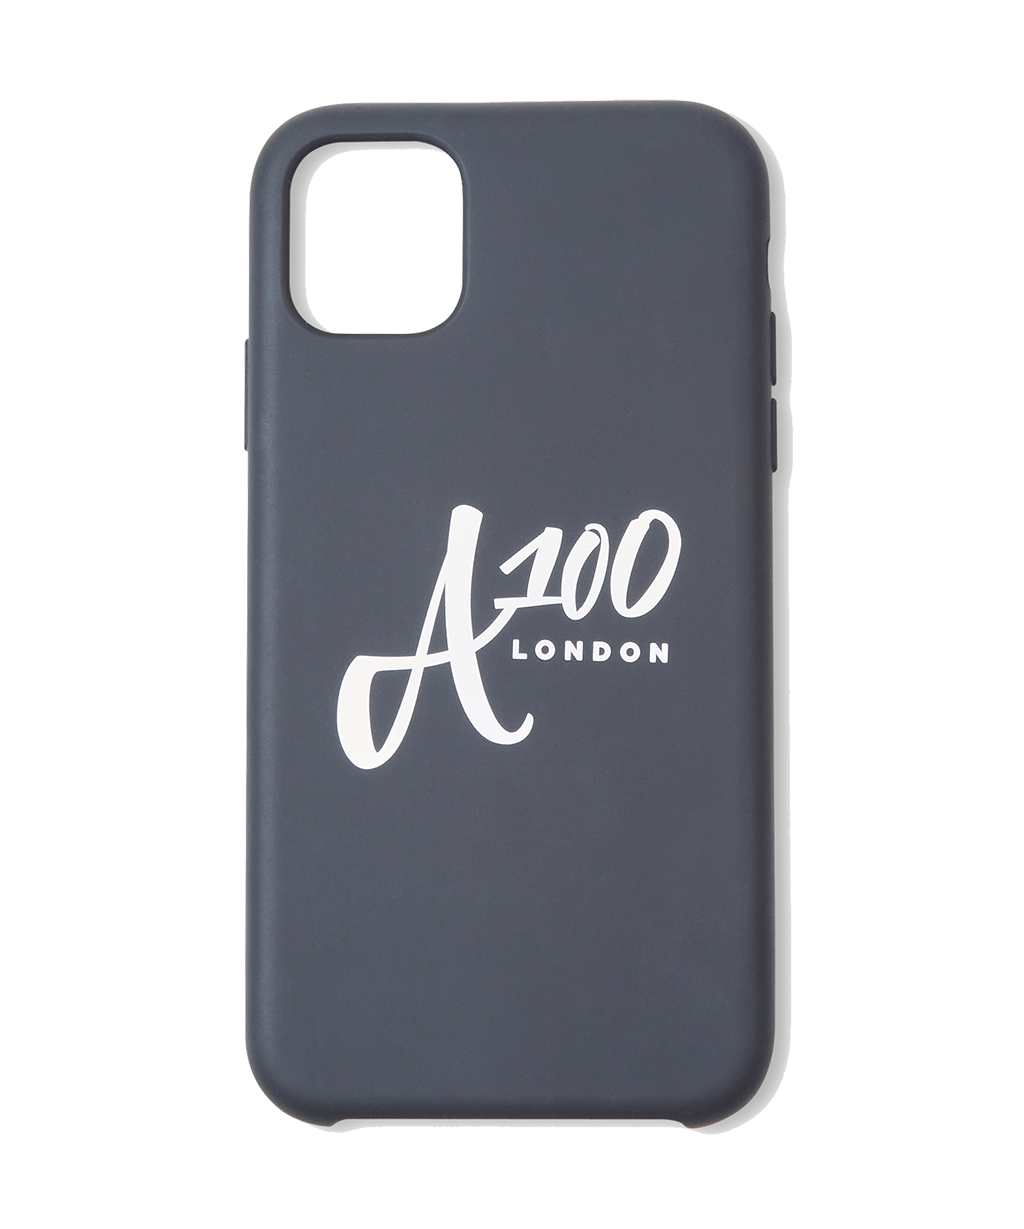 iPhone A100 London Cover